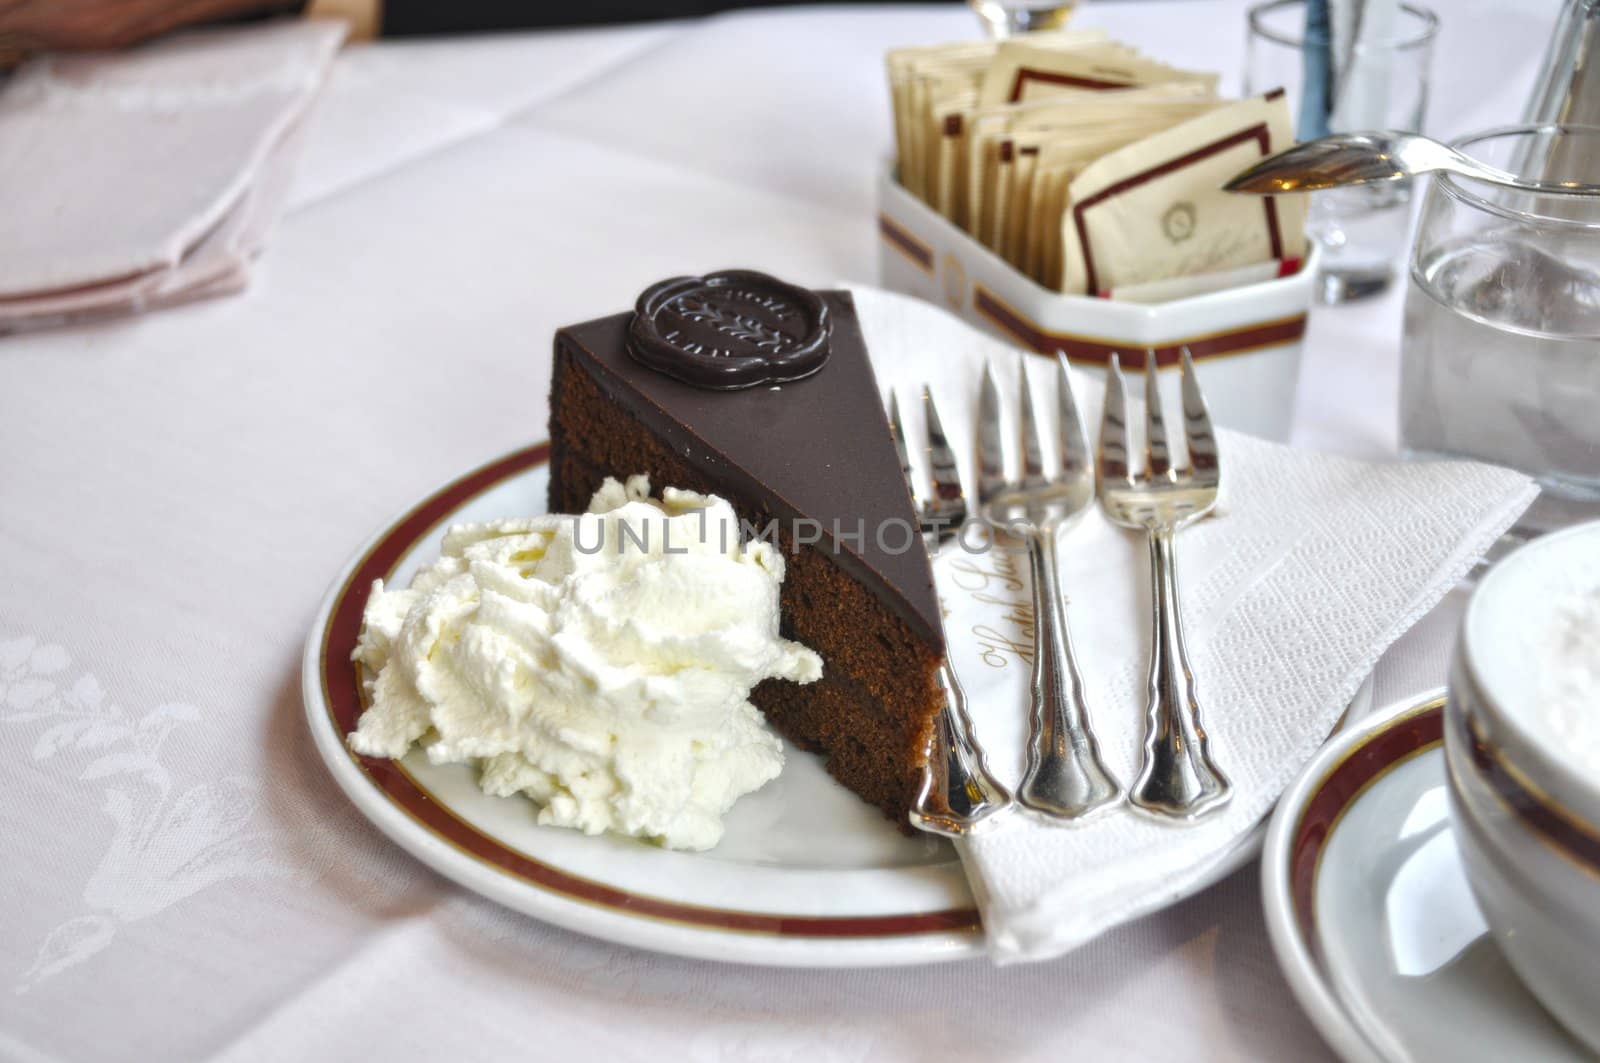 Chocolate Biscuit Cake in famous caffe in Vienna